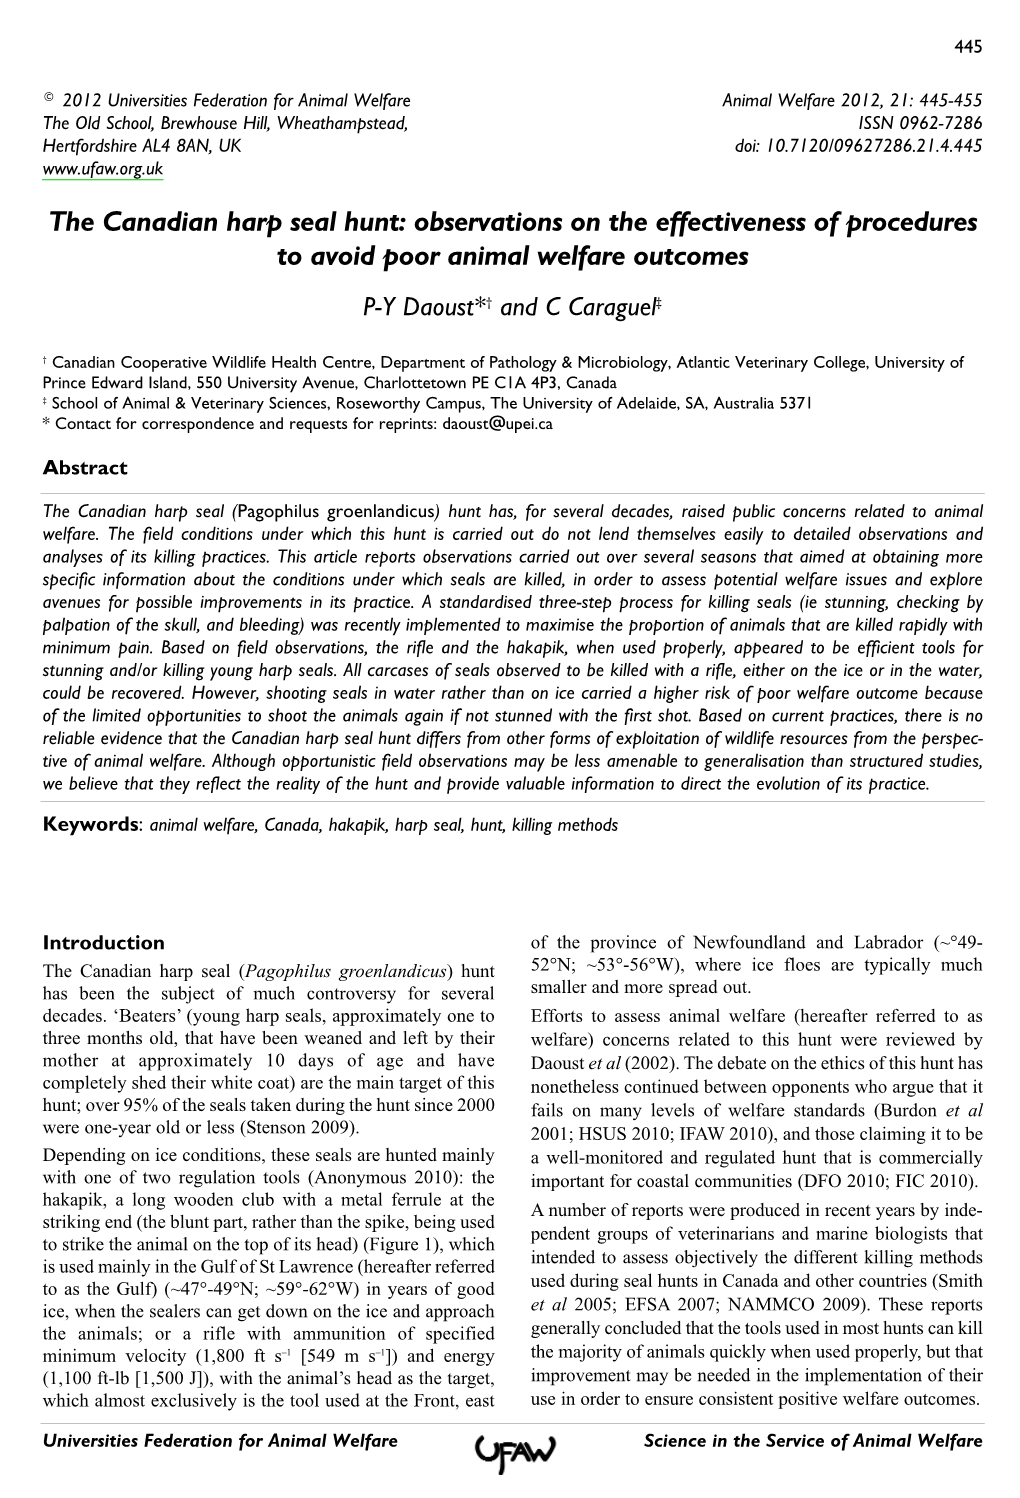 The Canadian Harp Seal Hunt: Observations on the Effectiveness of Procedures to Avoid Poor Animal Welfare Outcomes P-Y Daoust*† and C Caraguel‡